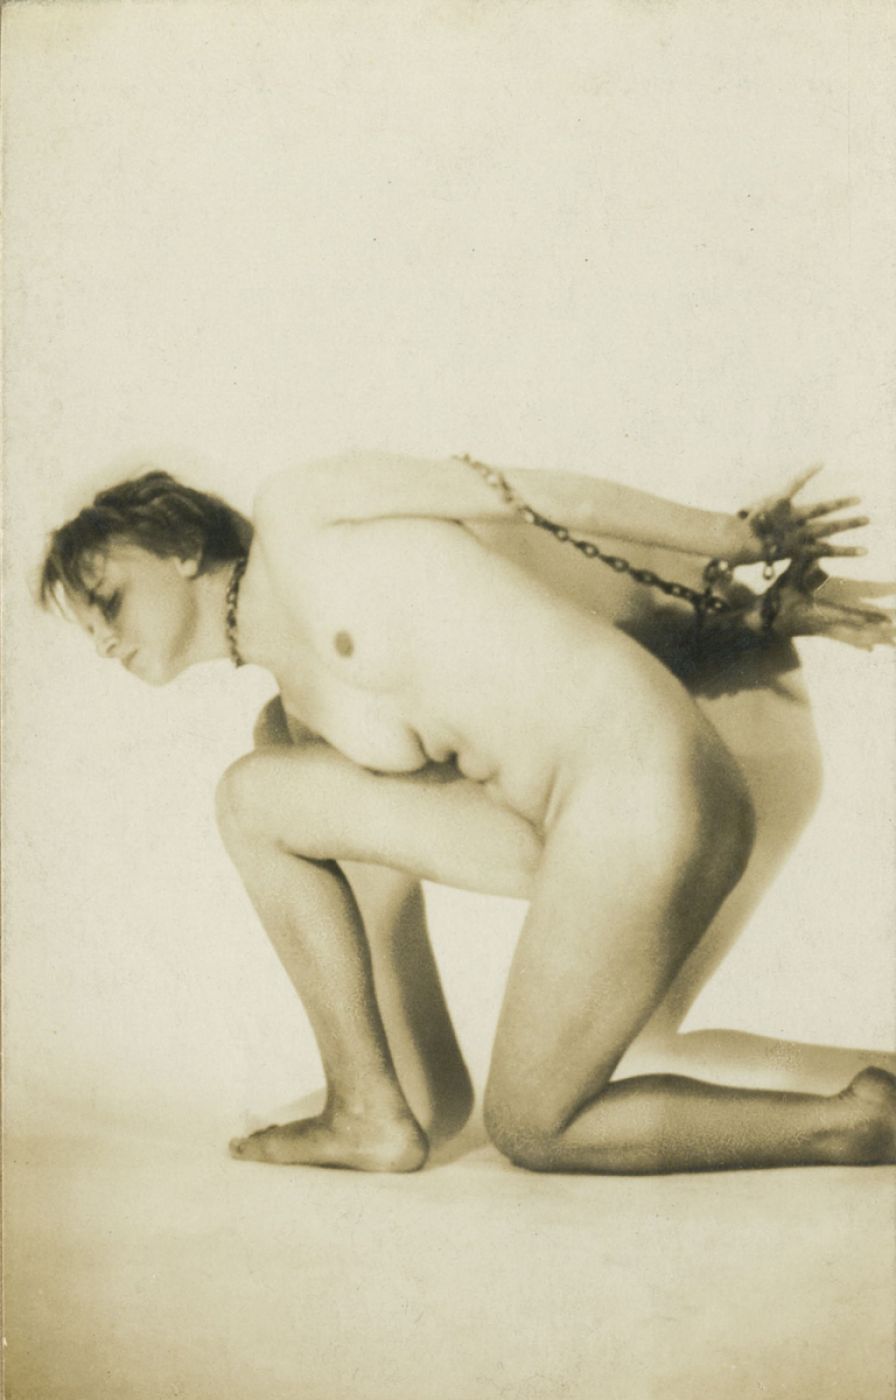 Anonymous, “Untitled”, 1920 ca.